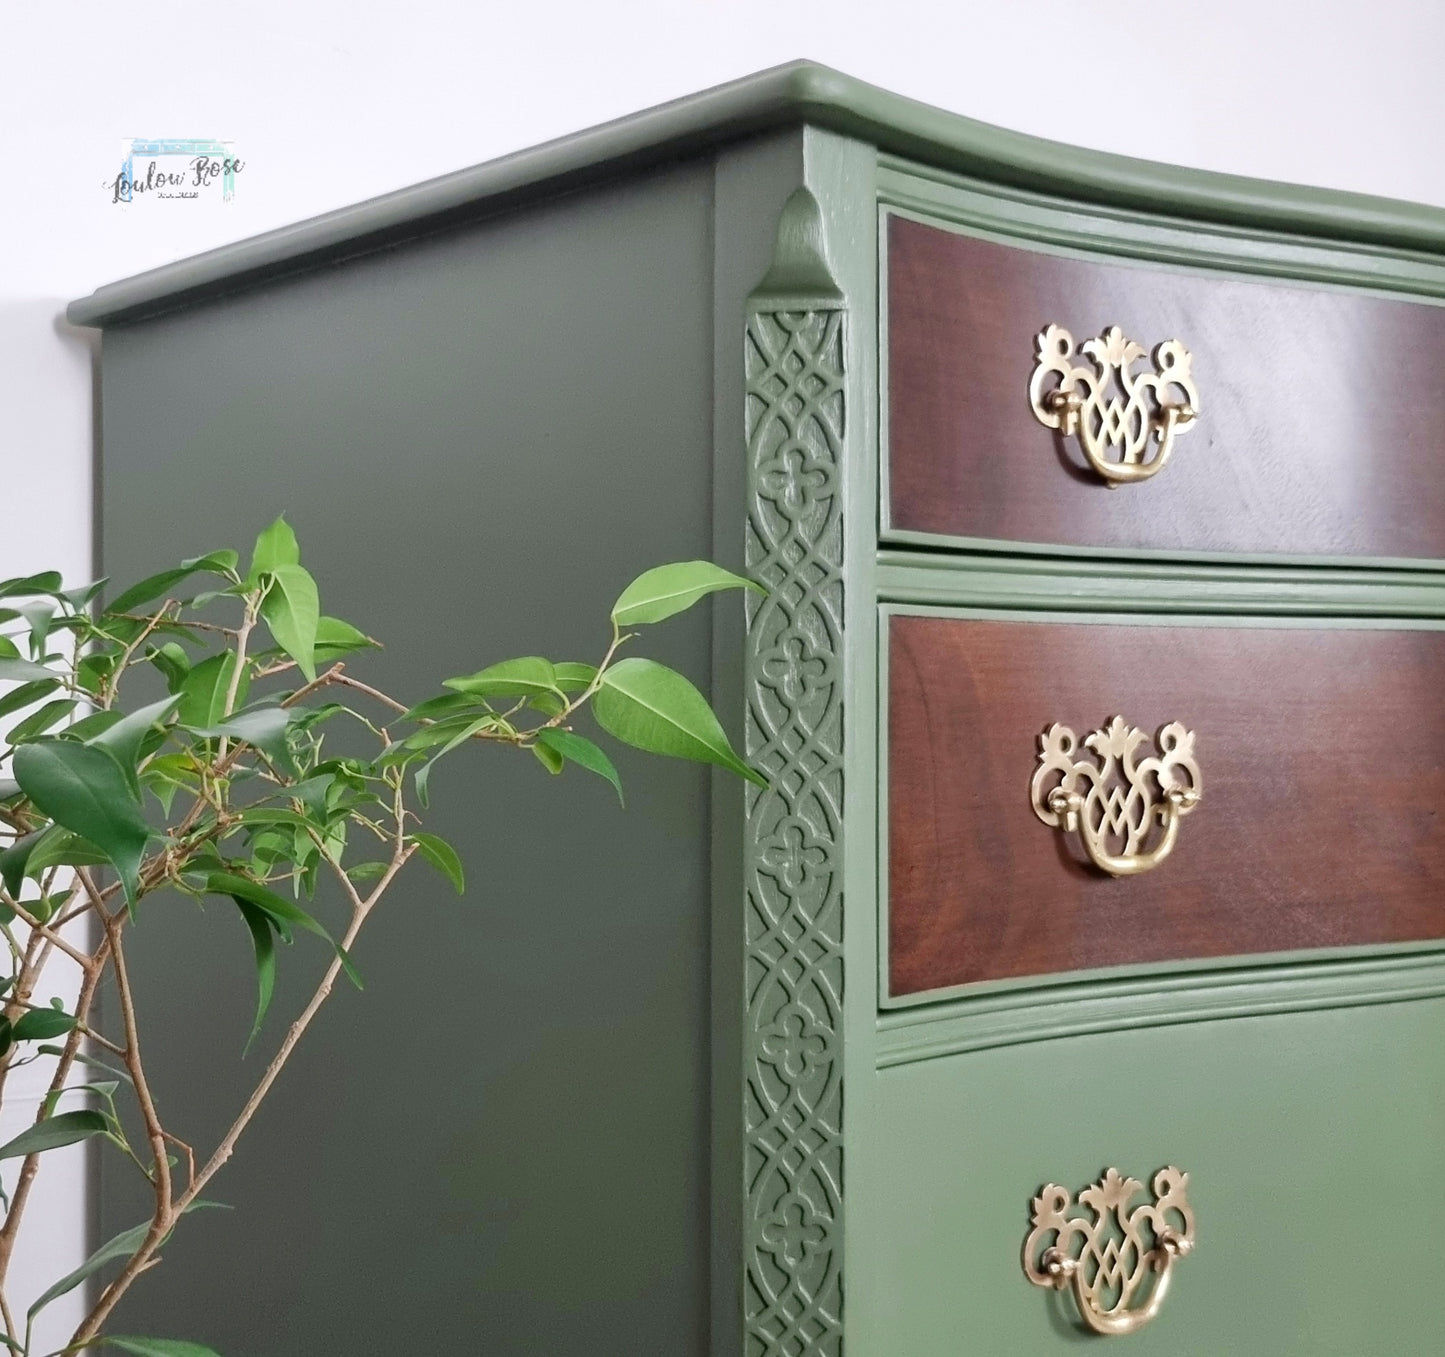 Serpentine Chest of Drawers in Green with Mahogany Drawer Fronts